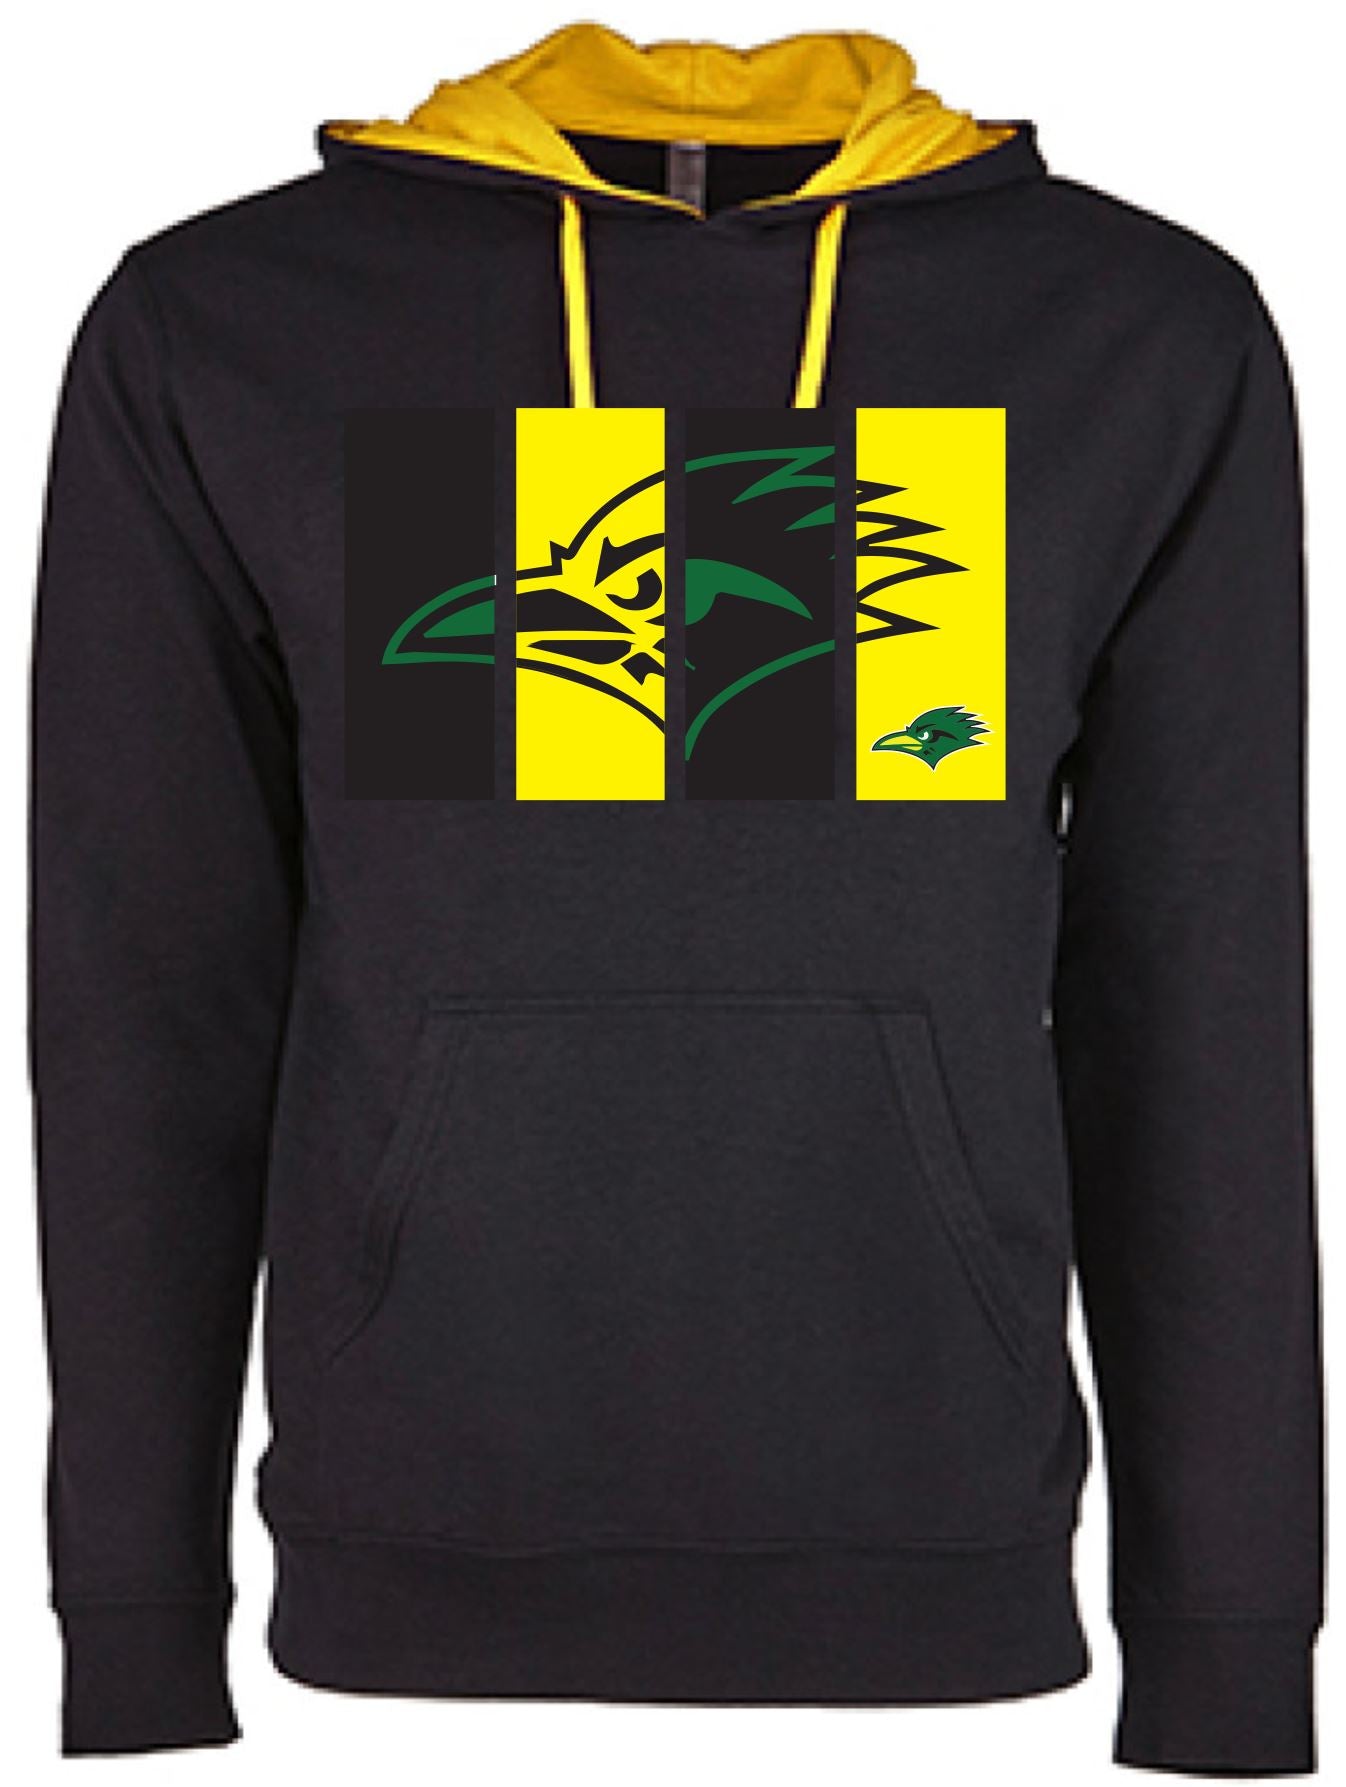 STSC designs Next Level Apparel French Terry Pullover Hoodie